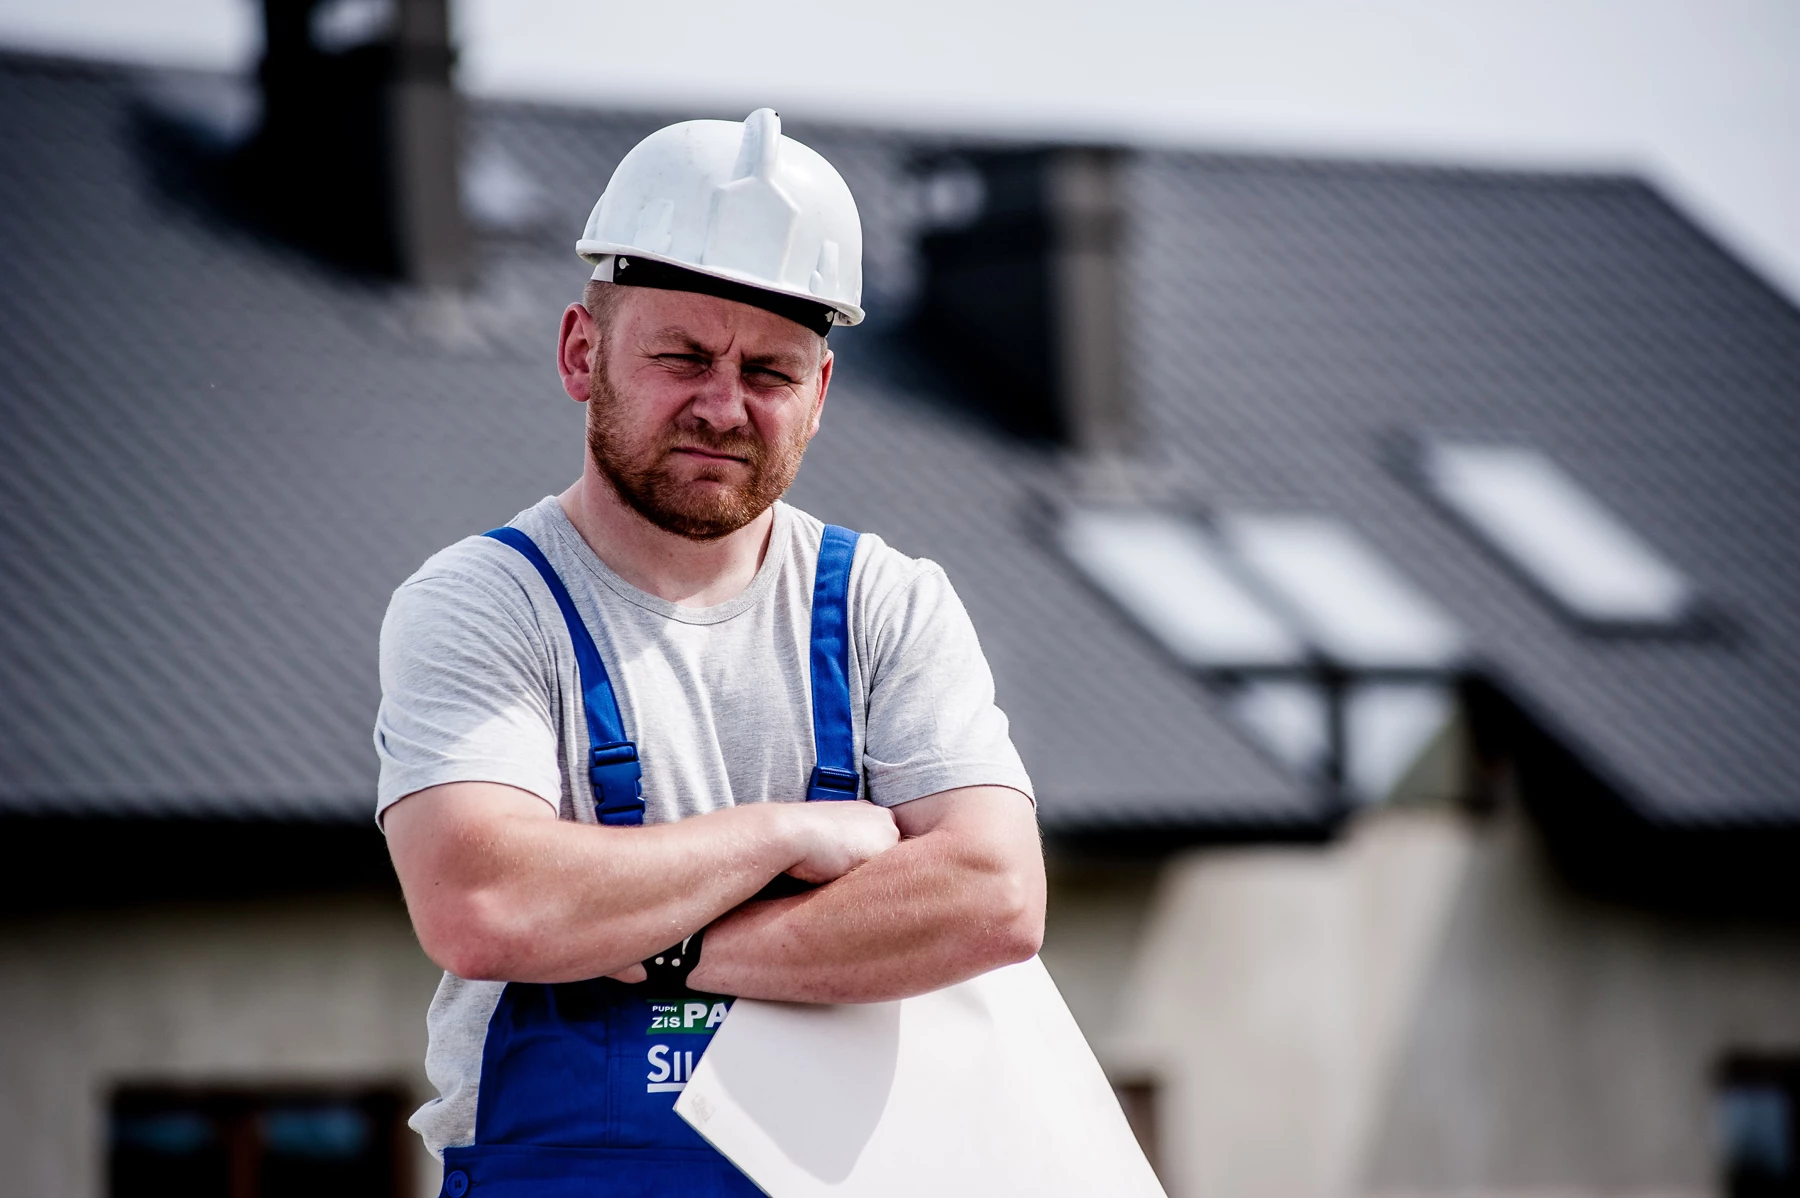 A building contractor with an angry expression standing in-front of a project